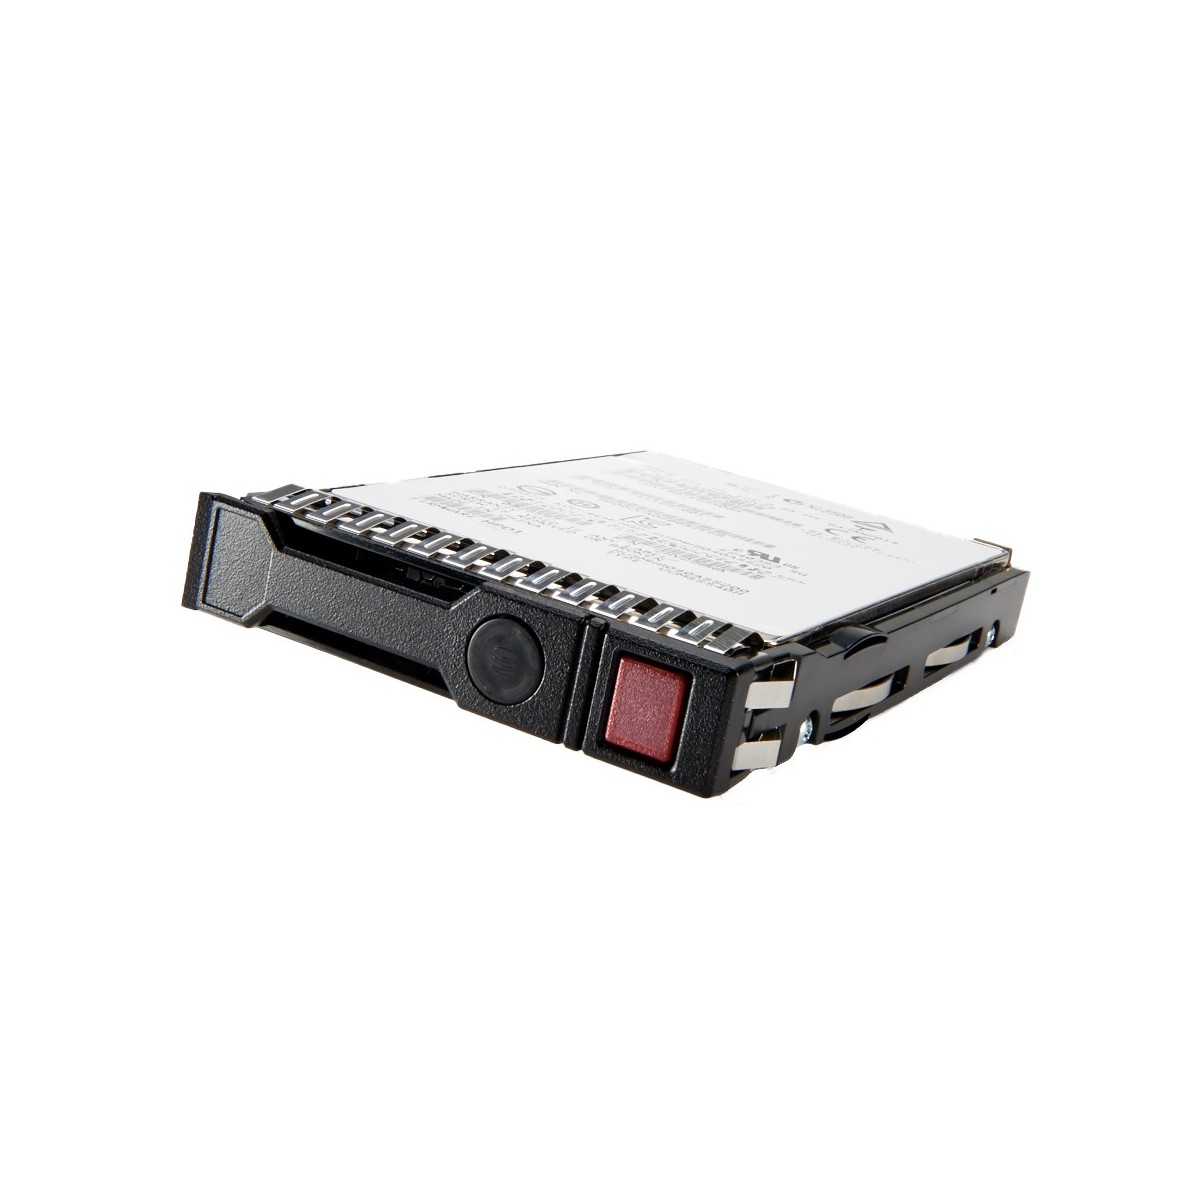 HPE MSA 300GB 12G 15K 2.5 INCH - Hdd - Serial Attached SCSI (SAS)